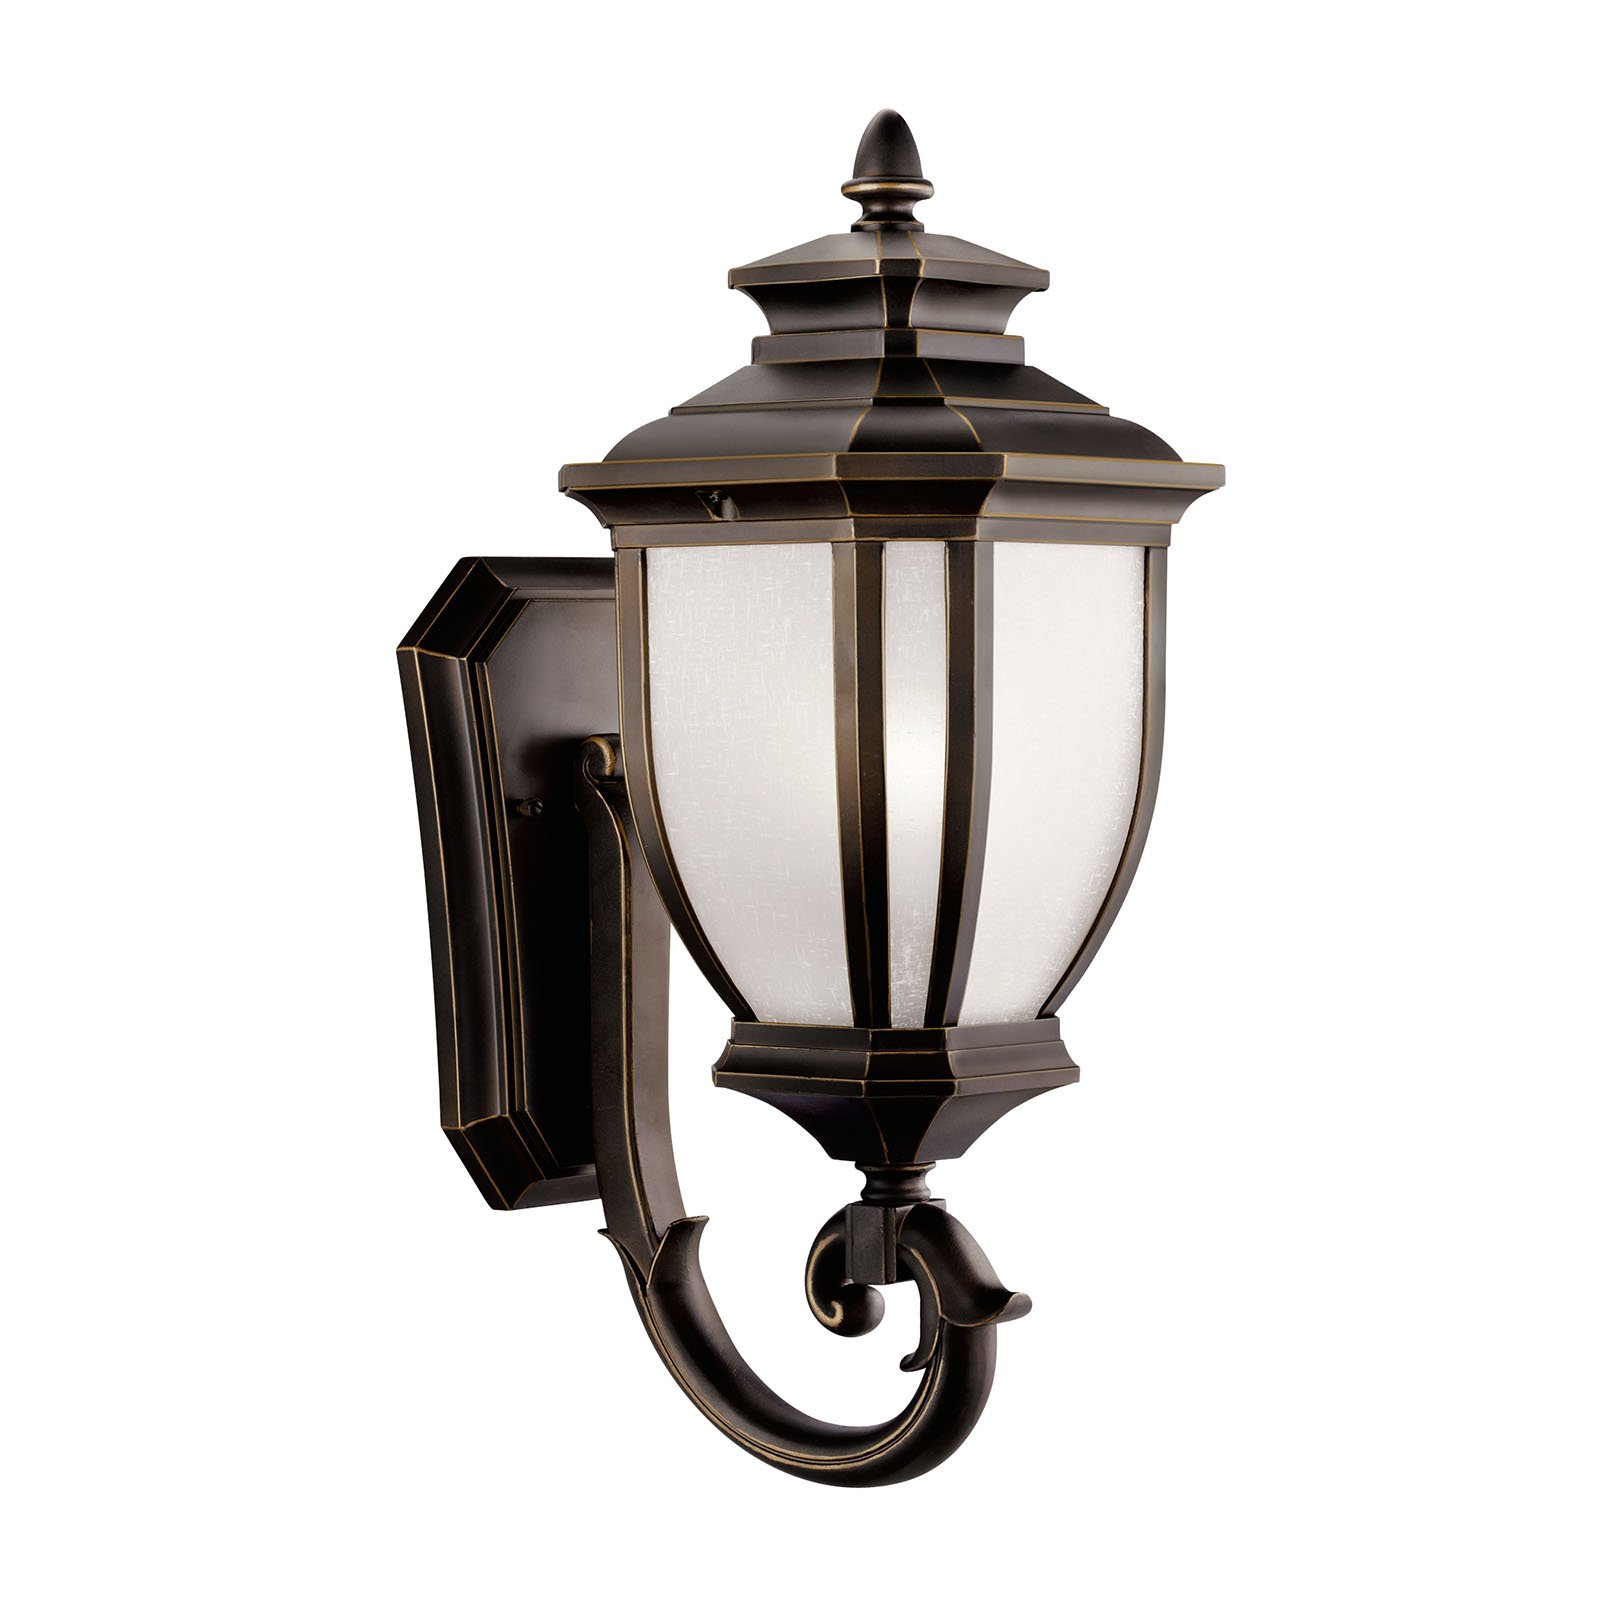 With an unmistakable British influence, this 1 light wall lantern from the elegant Salisbury(TM) collection projects timeless style for exterior spaces. Accented with a Rubbed Bronze(TM) finish and White Linen Glass, this piece is as functional as it is refined.